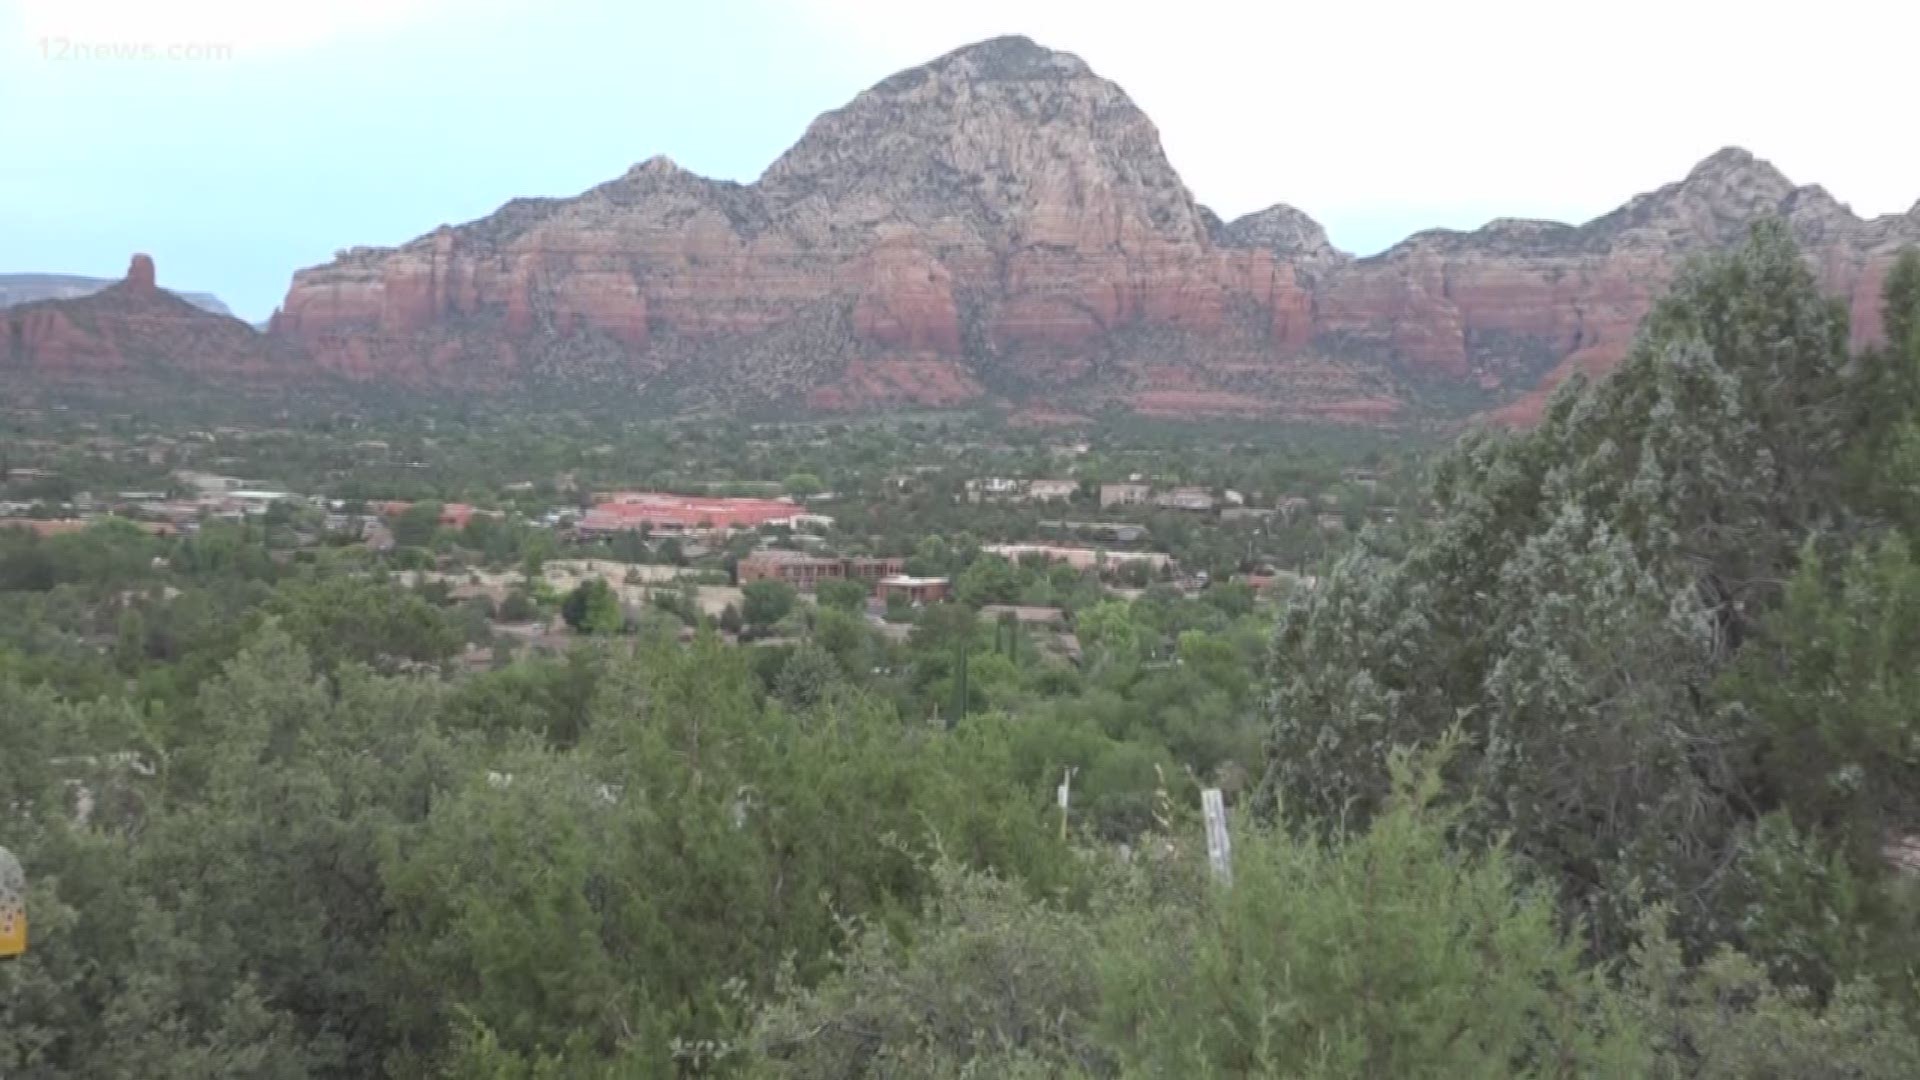 As Sedona faces a housing crisis, blue-collar workers may have the option to live in a small community about 20 miles south. A developer wants to build a large, affordable housing complex in the town of Rimrock, but the City of Rimrock is pushing back.